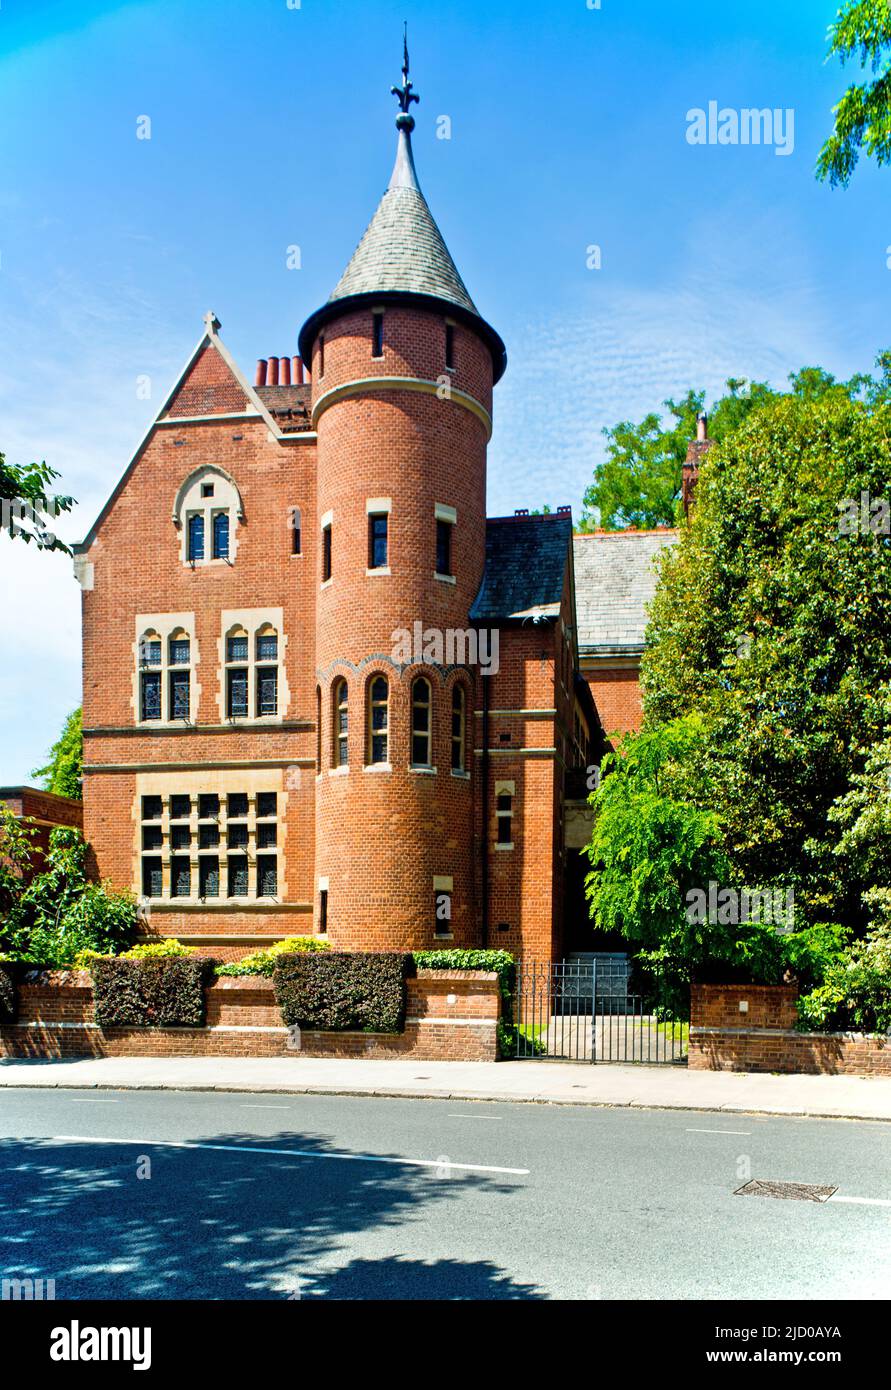 Tower House appartenant au guitariste LED Zeppelin Jimmy page, Melbury Road, Holland Park, Londres, Angleterre Banque D'Images